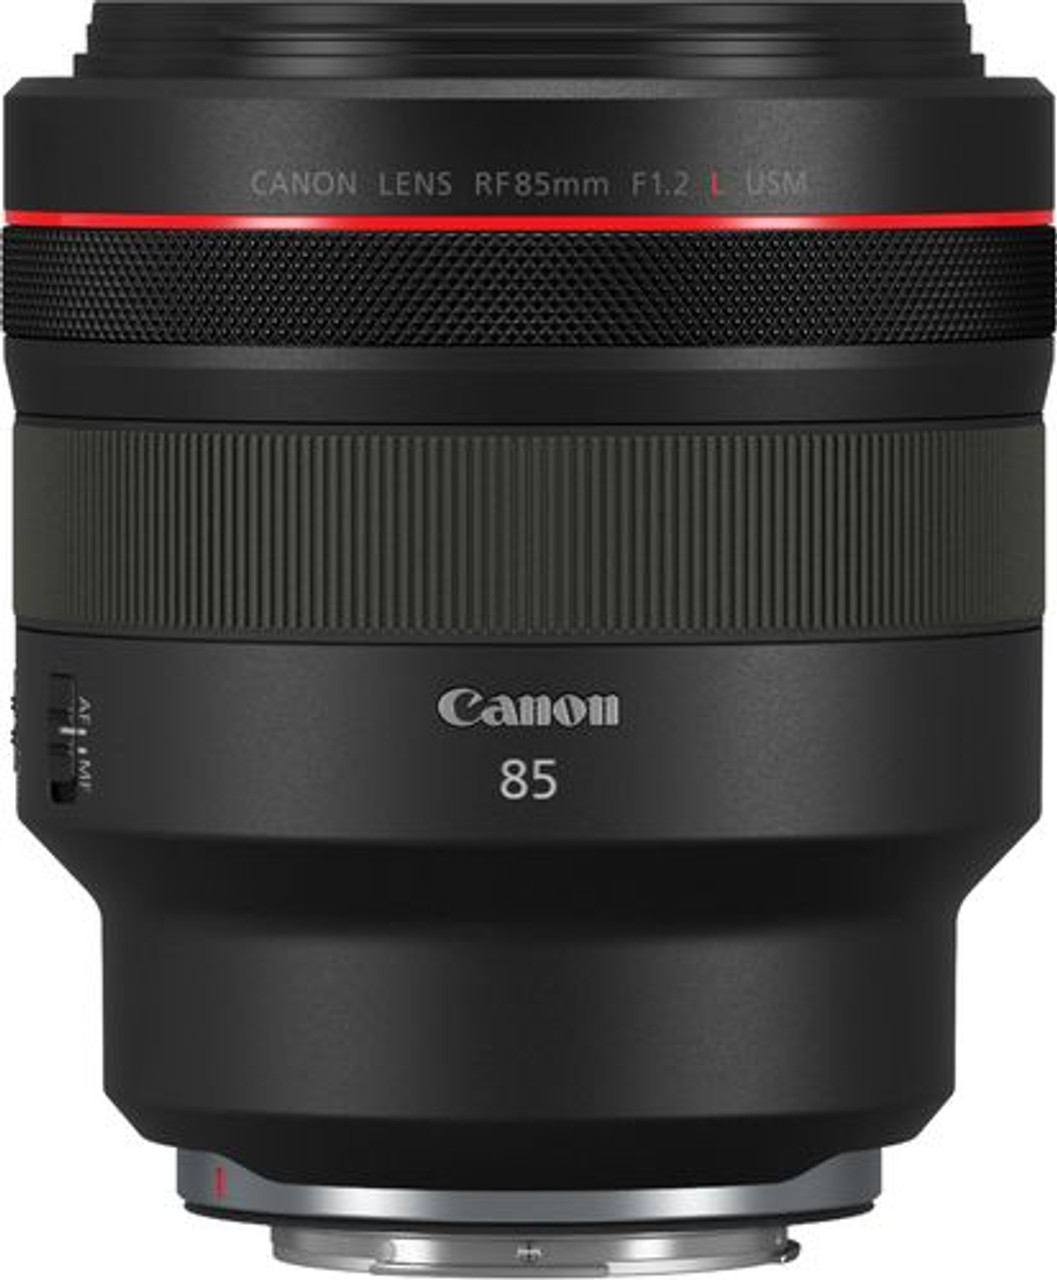 Canon - RF 85mm F1.2 L USM Mid-Telephoto Prime Lens for Canon EOS R and EOS RP Cameras